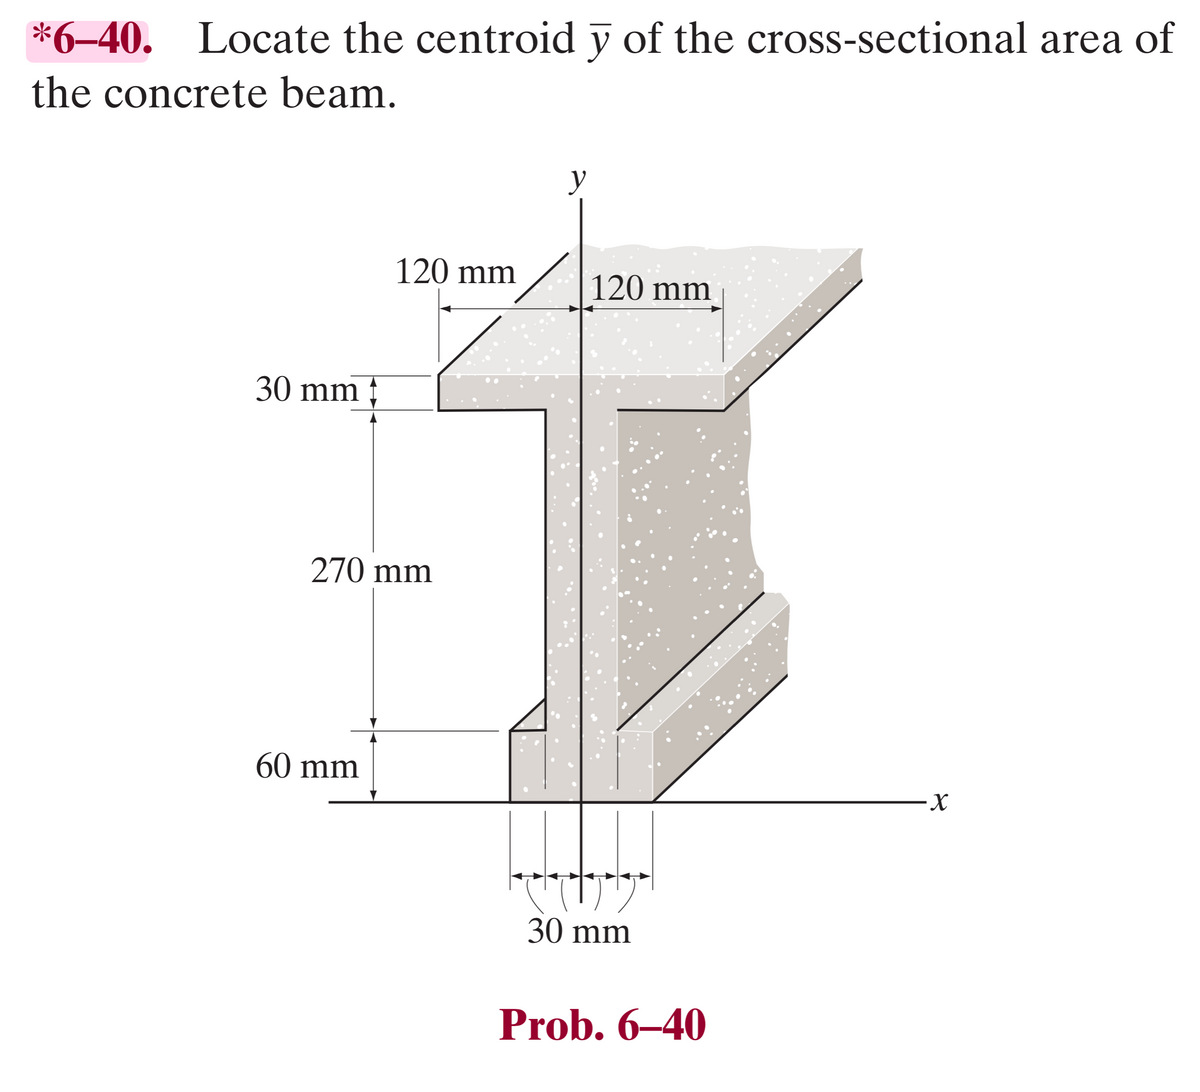 *6-40. Locate the centroid y of the cross-sectional area of
the concrete beam.
30 mm +
120 mm
270 mm
60 mm
y
120 mm
30 mm
Prob. 6-40
-X